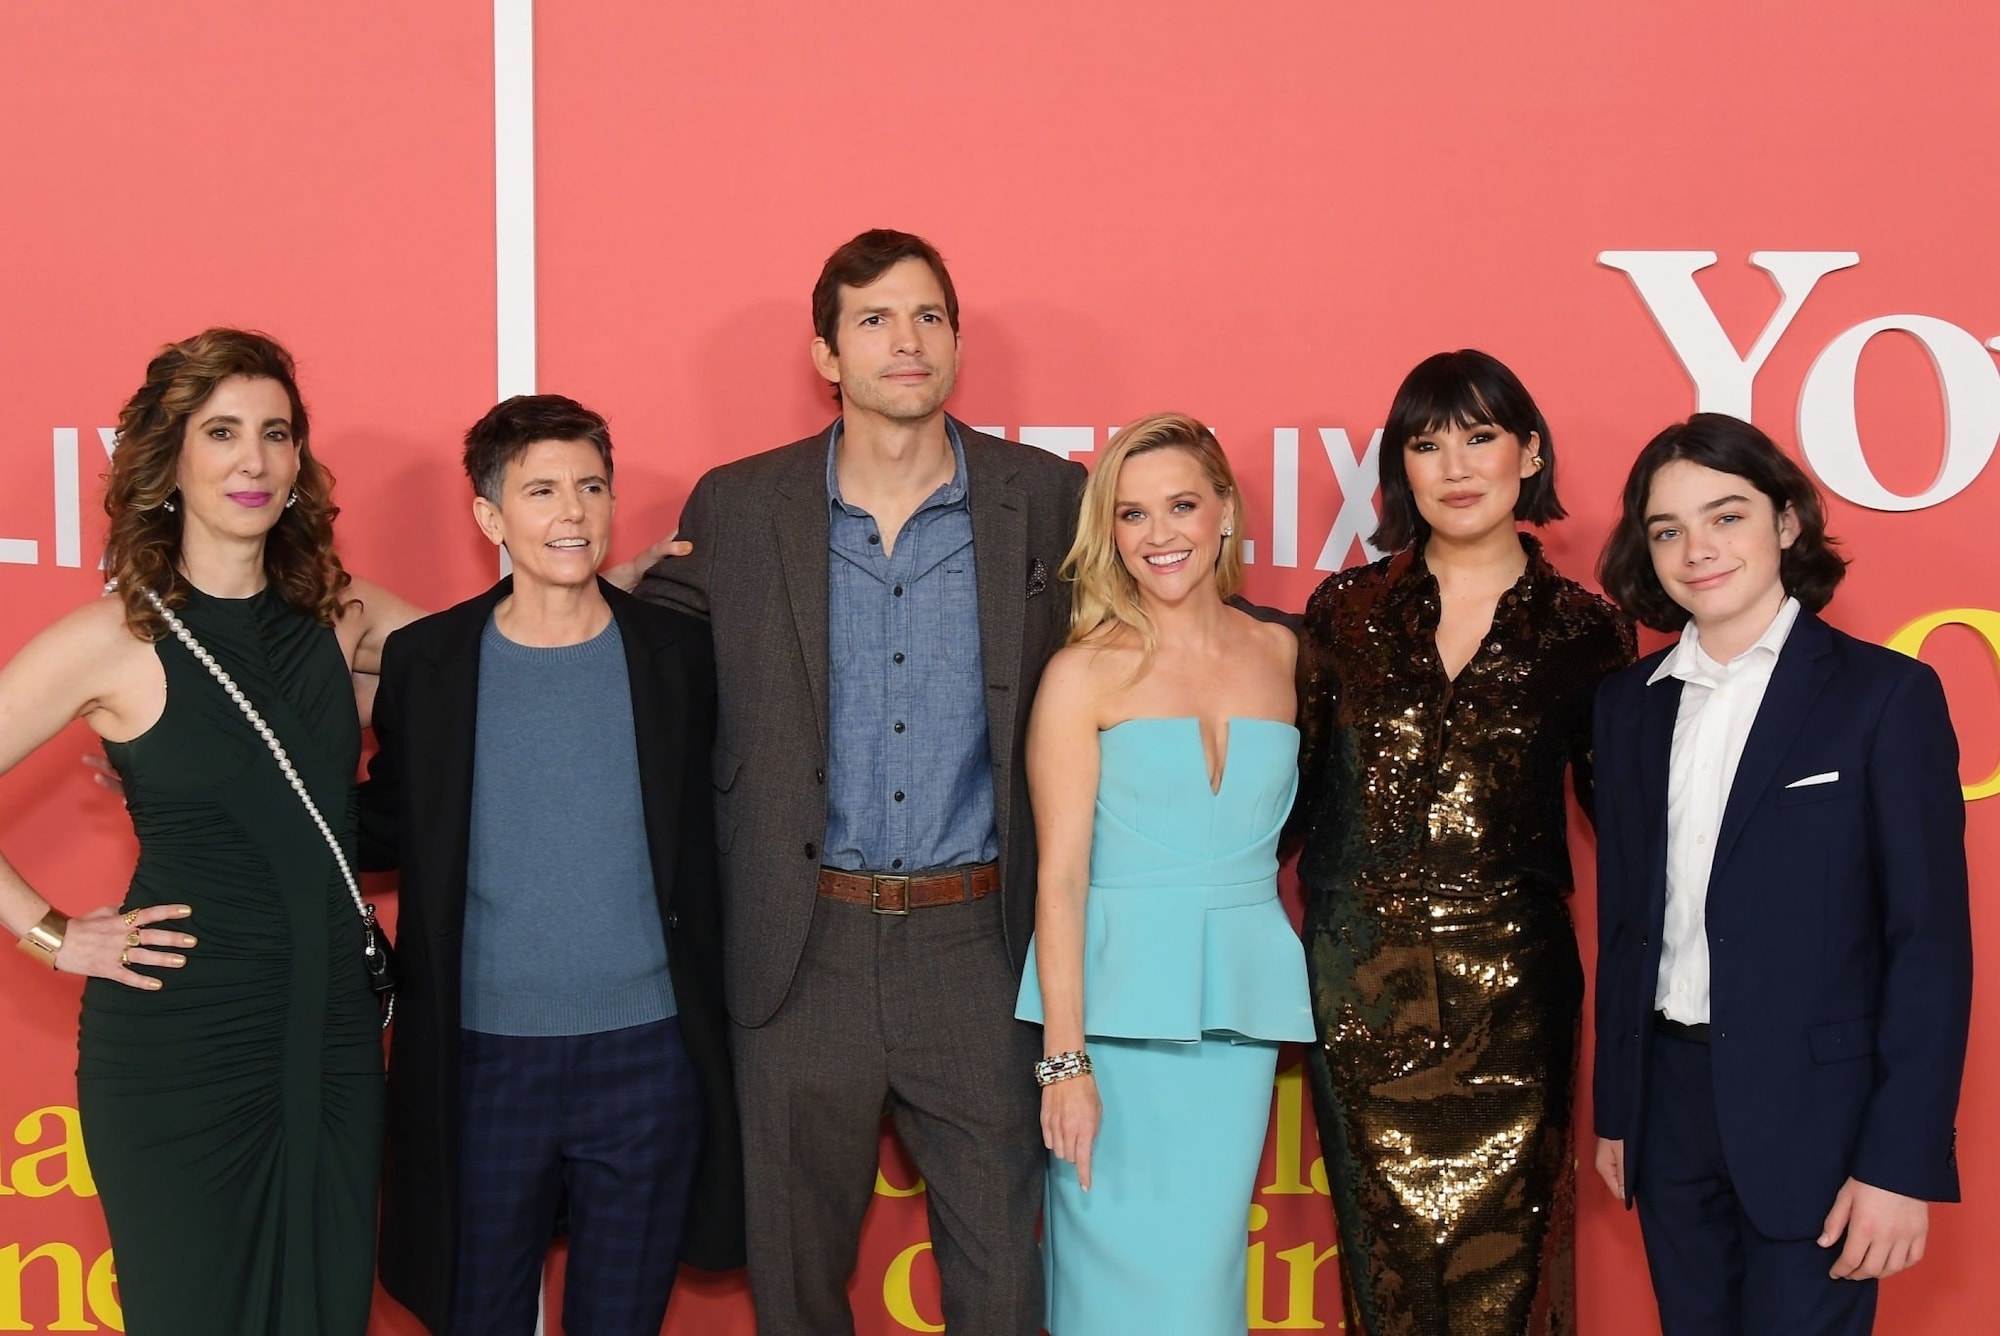 (L-R) Aline Brosh McKenna, Tig Notaro, Ashton Kutcher, Reese Witherspoon, Zoe Chao and Wesley Kimmel on the red carpet.